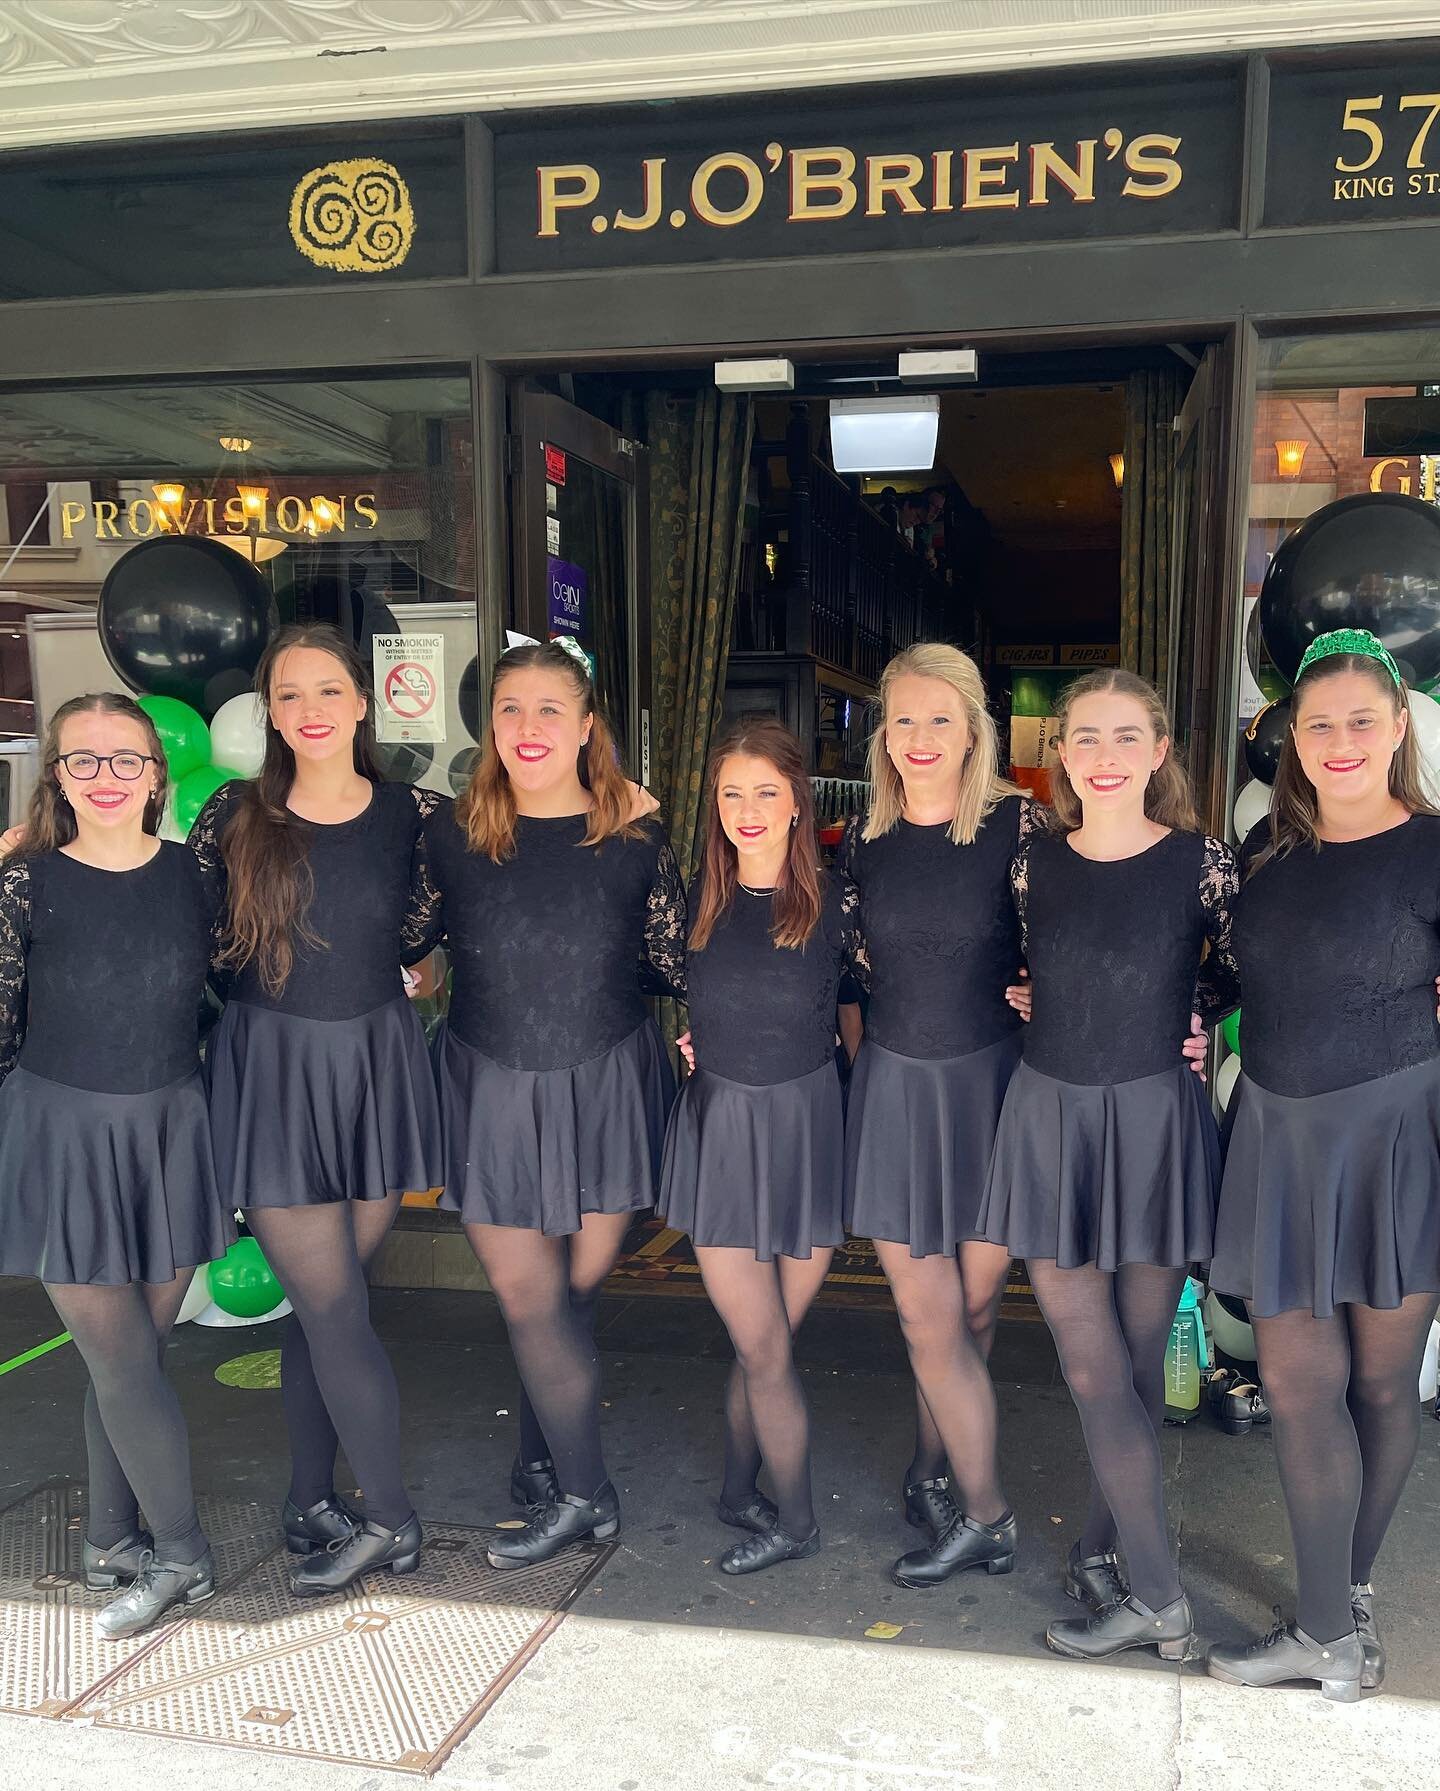 ☘️💚 Happy St Patrick&rsquo;s Day!! Starting our day off in the best way possible with our friends at @pjobrienssyd 💚☘️

#irishdance #irishdancing #stpatricksday #irishinsydney